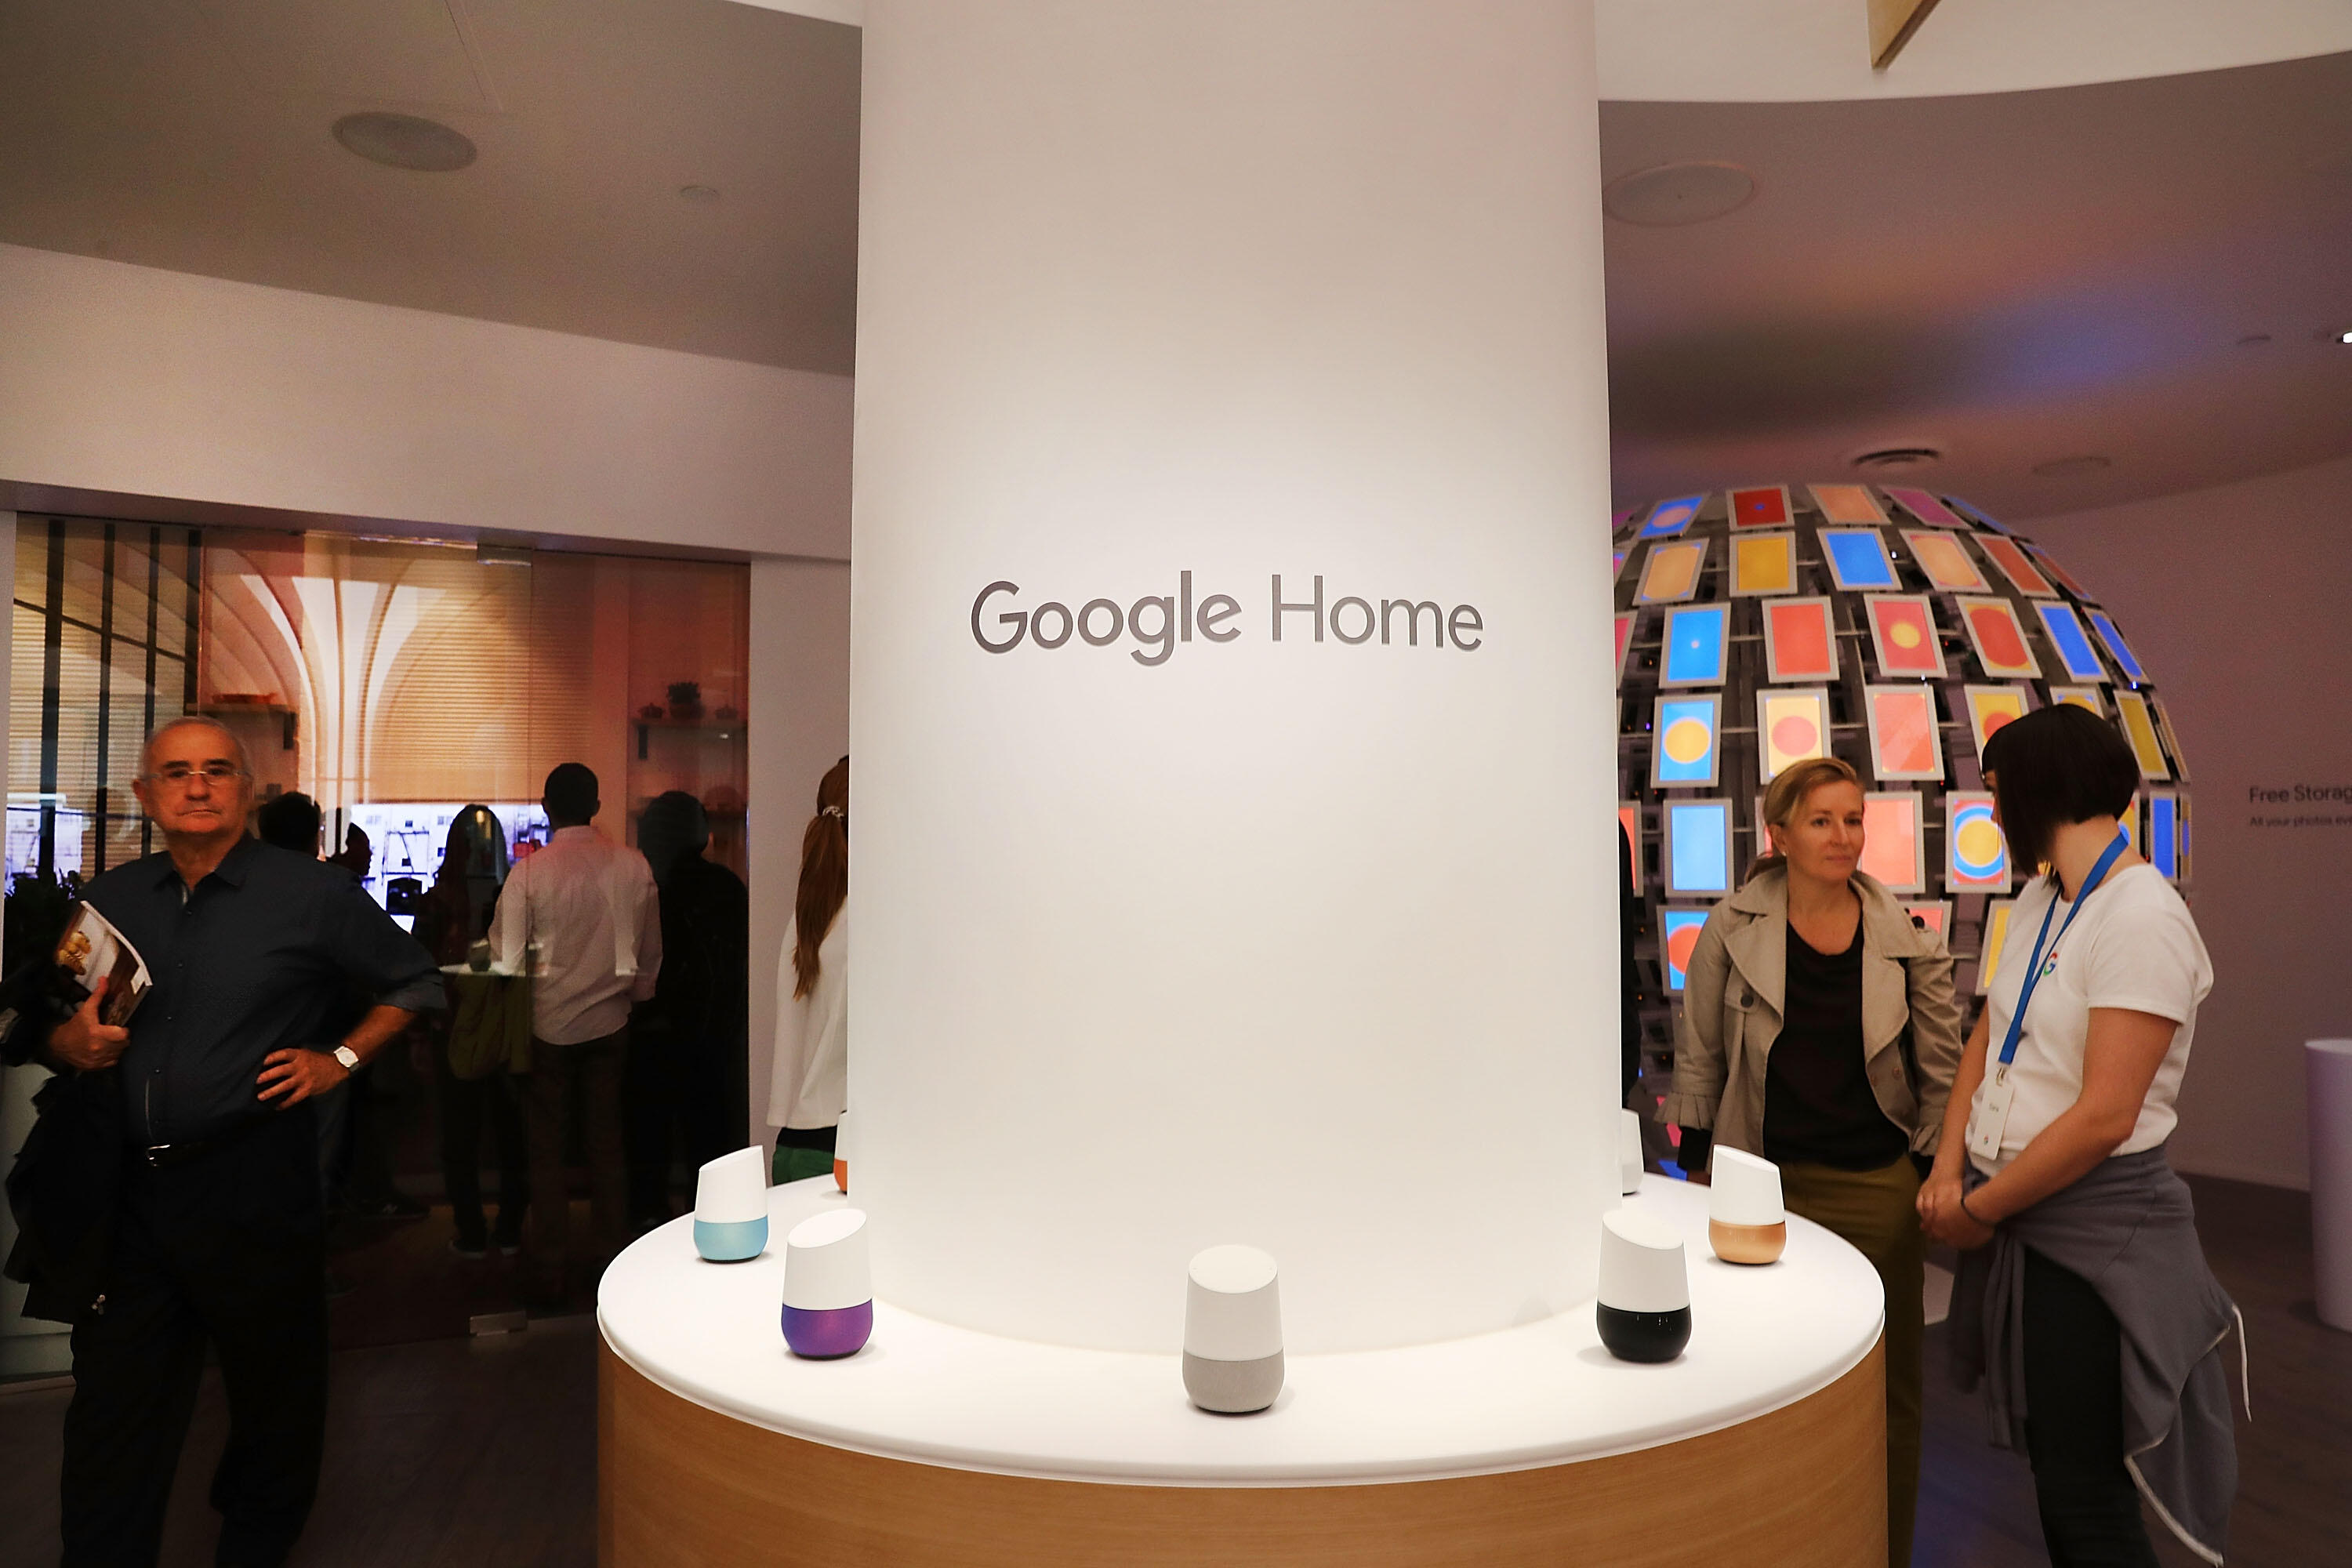 NEW YORK, NY - OCTOBER 20: People visit the new Google pop-up shop in the SoHo neighborhood on October 20, 2016 in New York City. The shop lets people try out new Google products such as the Pixel phone, Google Home, and Daydream VR. The products will be 